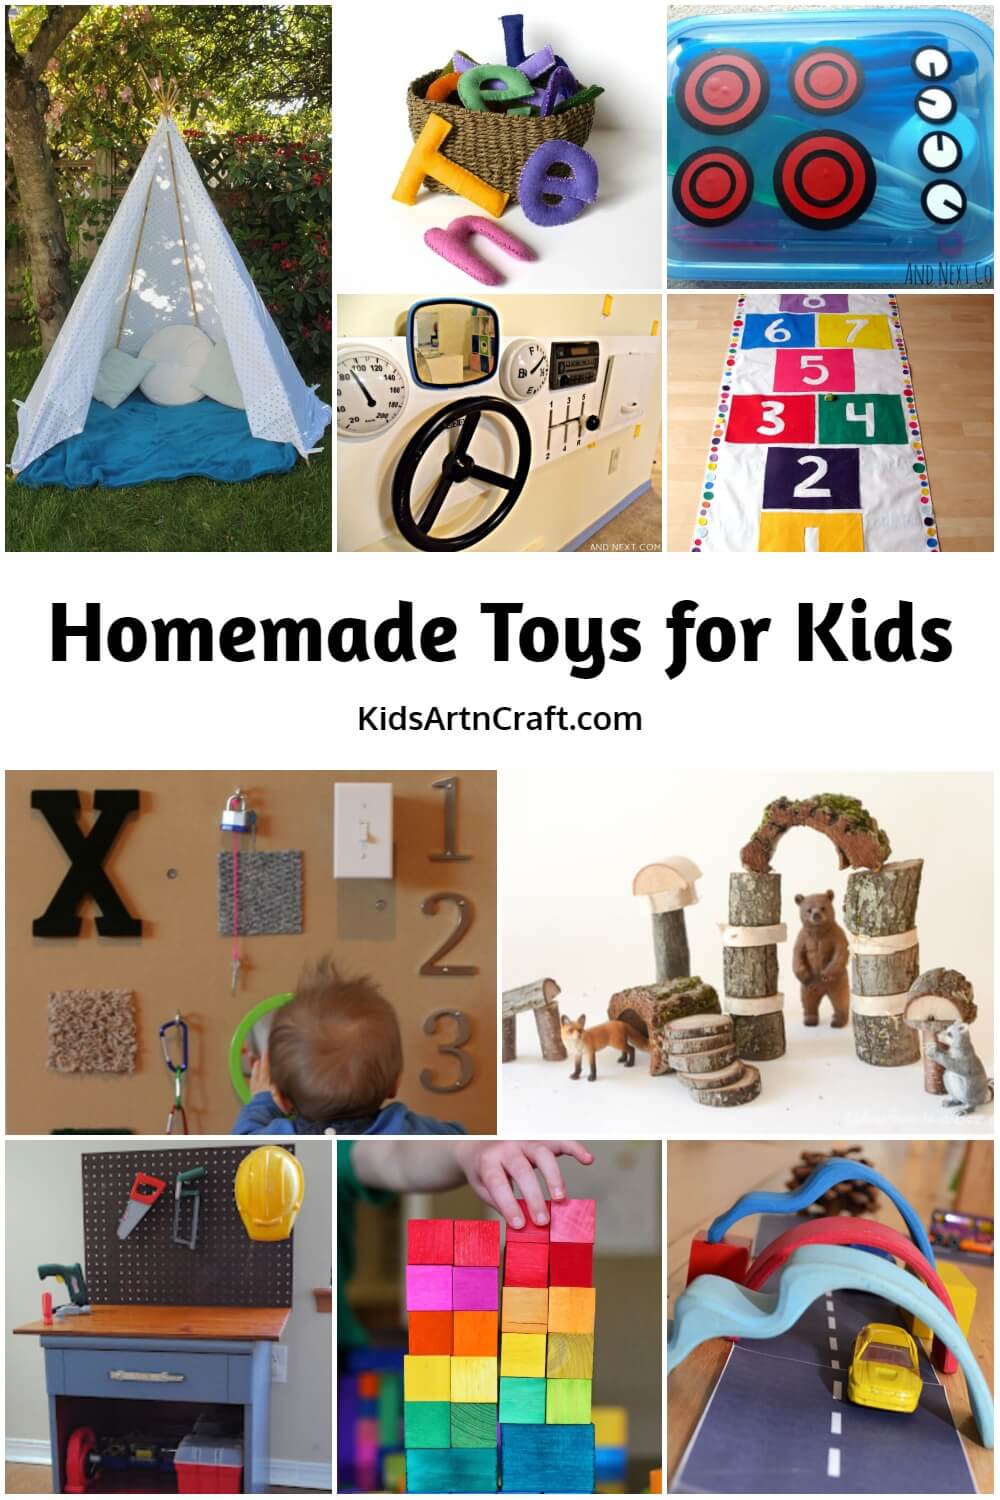 Homemade Toys You Can Make for Your Kids